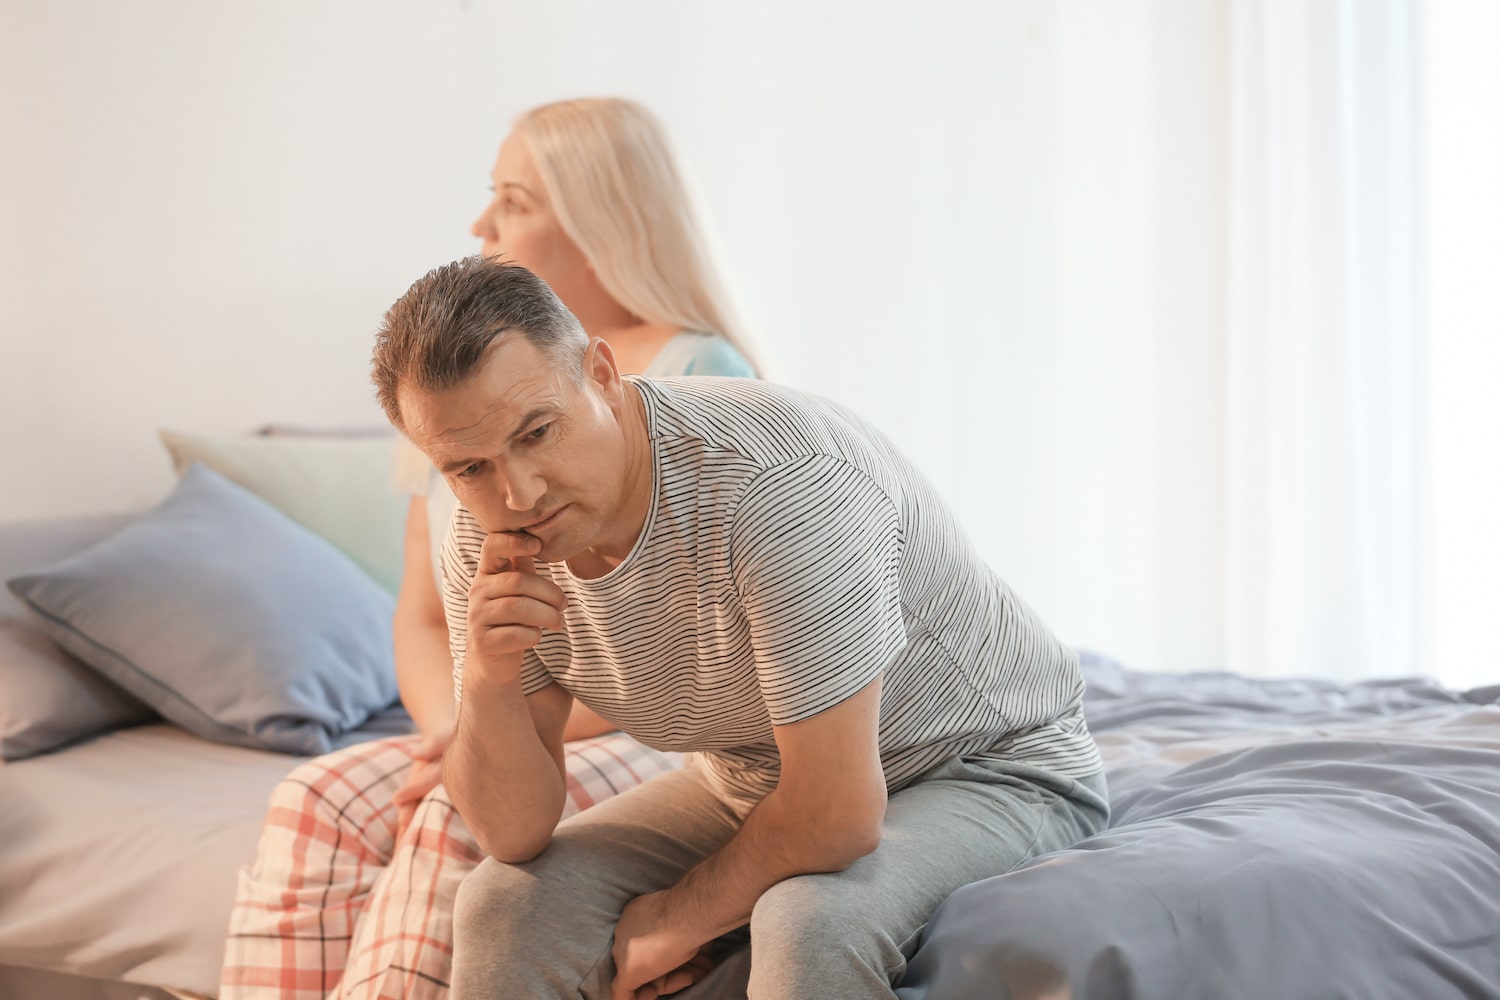 Sex and erection problems after treatment for prostate cancer